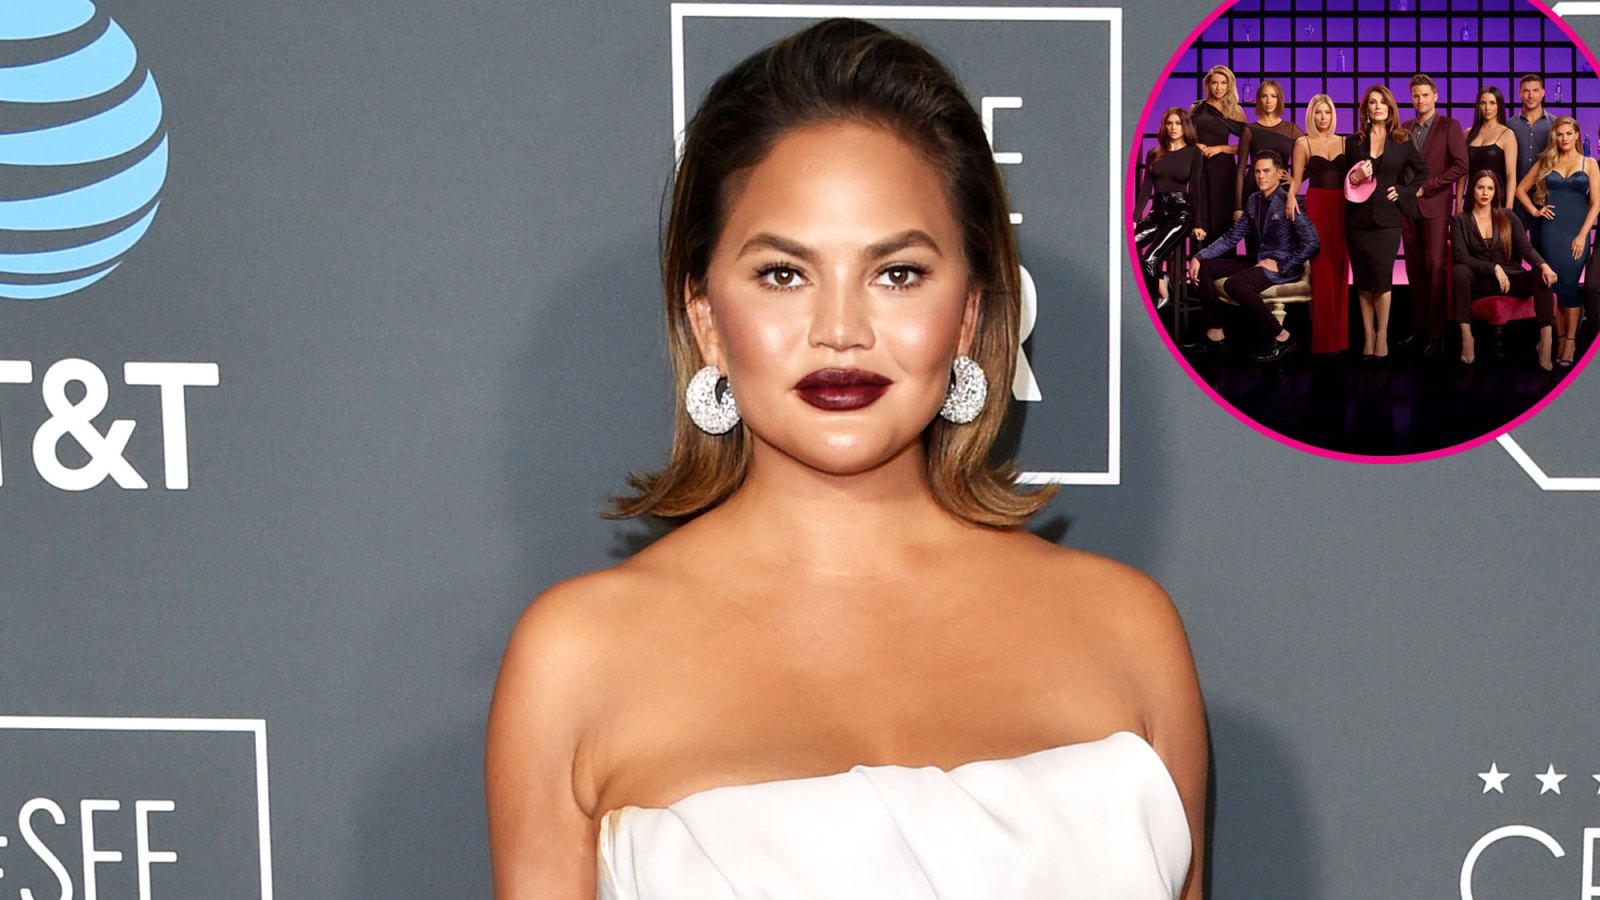 Chrissy Teigen Chipped a Tooth Filming ‘Family Feud’ With the Stars of ‘Vanderpump Rules’